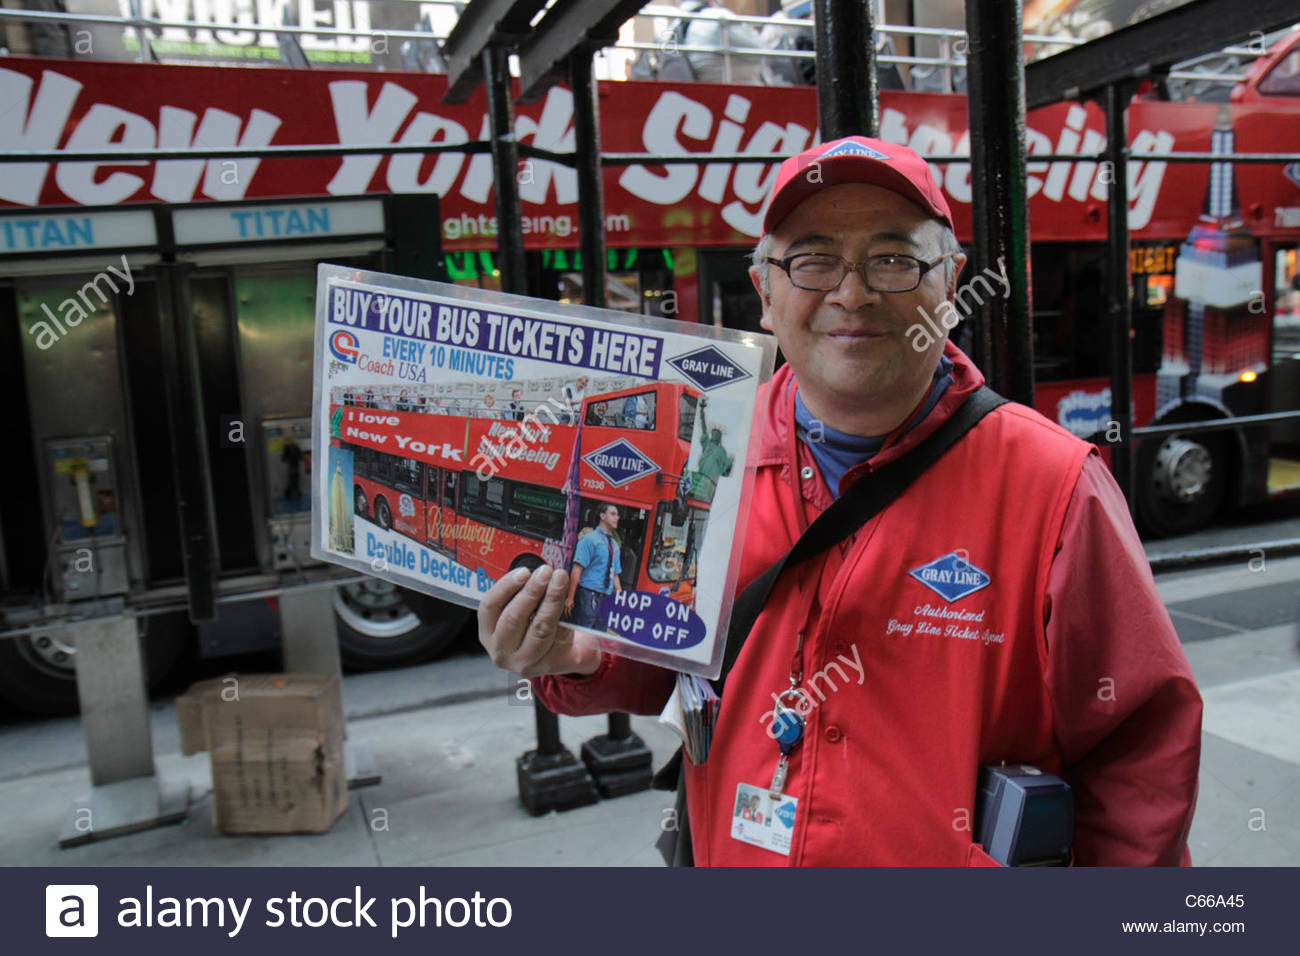 Image result for men who sell bus tour tickets in new york